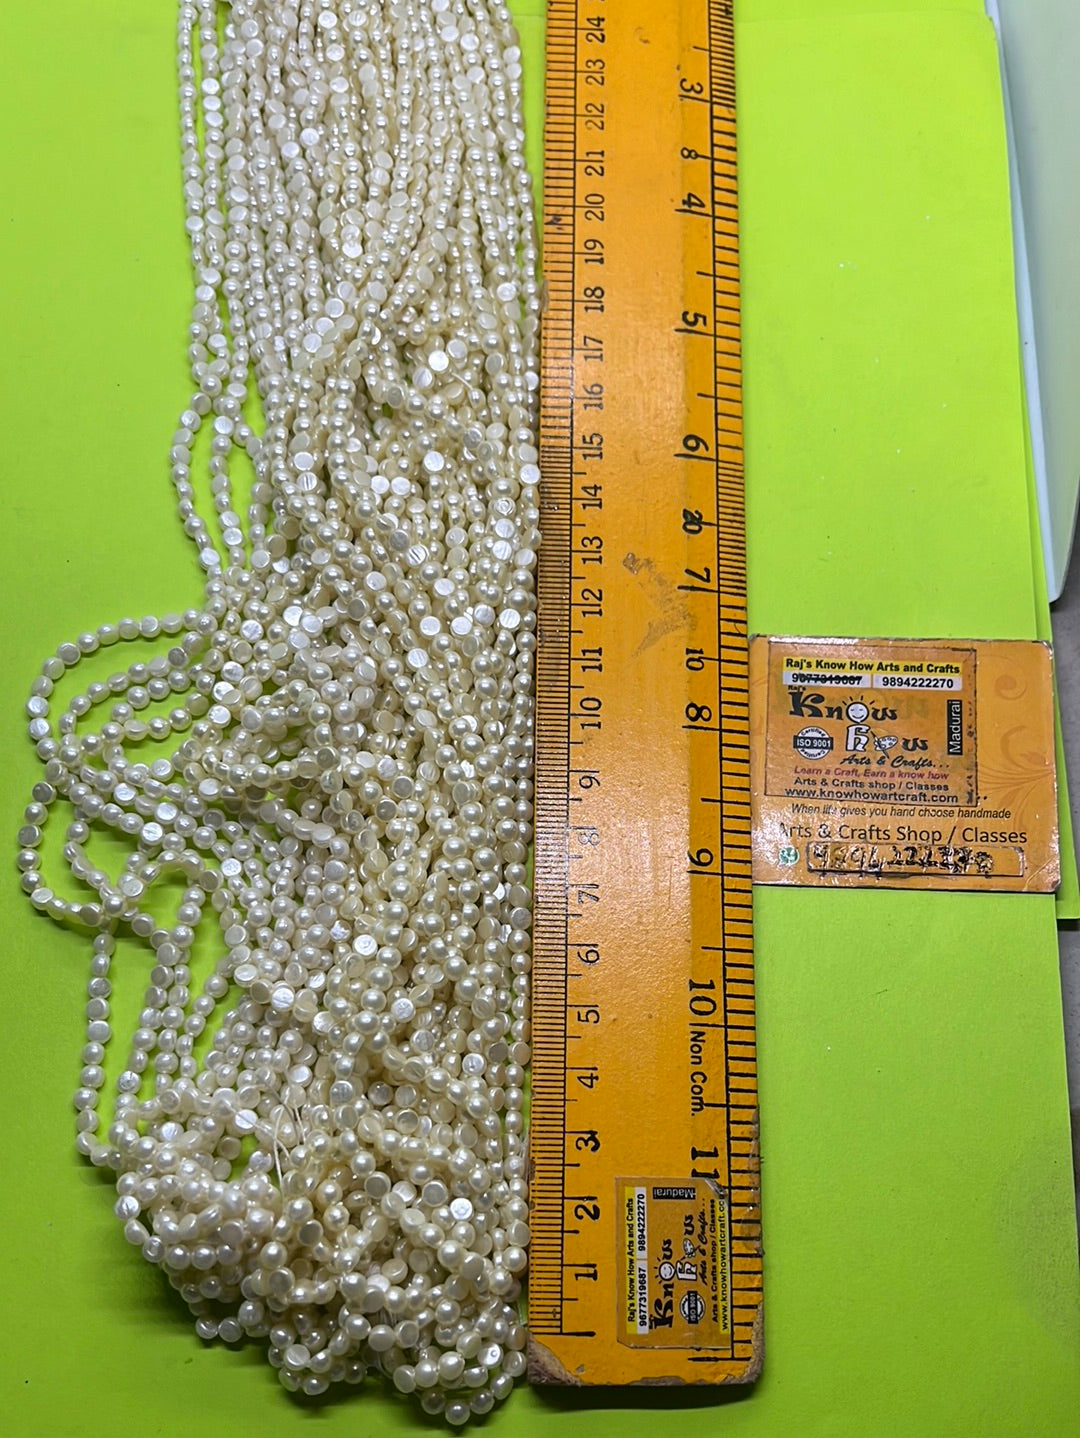 Ivory White half beads 4mm -500 beads in a punch 3